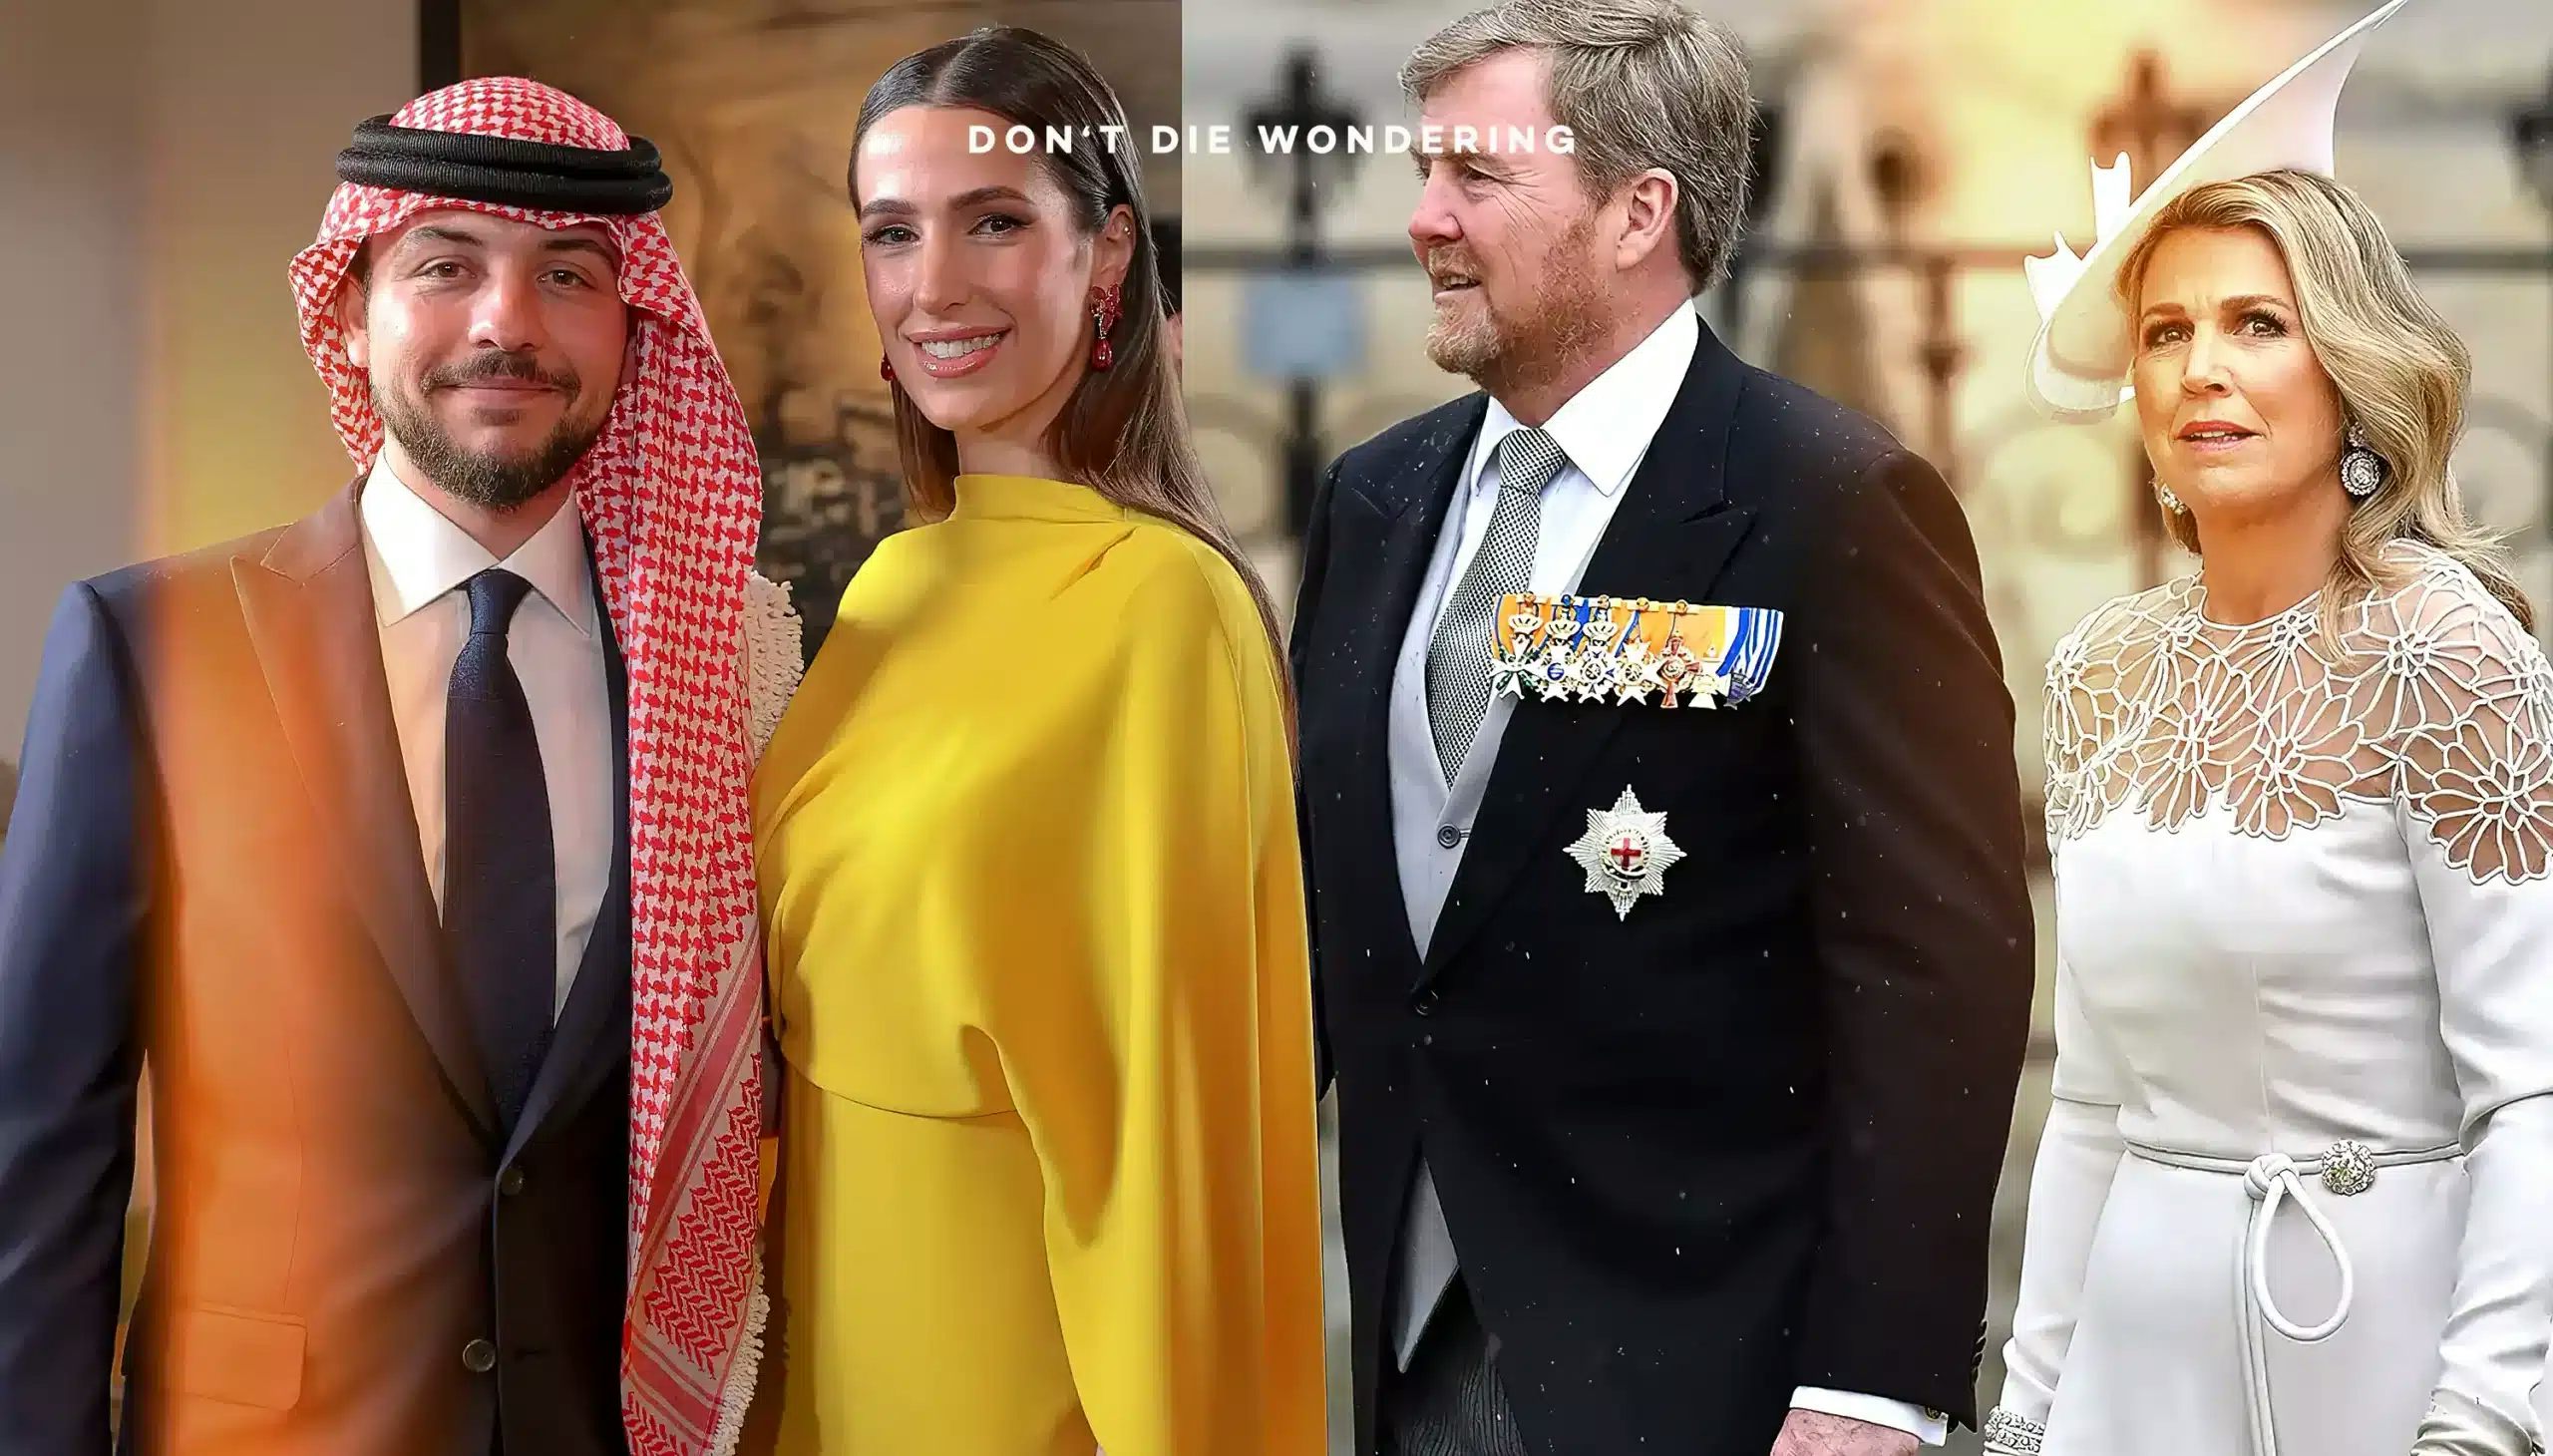 All About the Latest Jordanian Royal Wedding